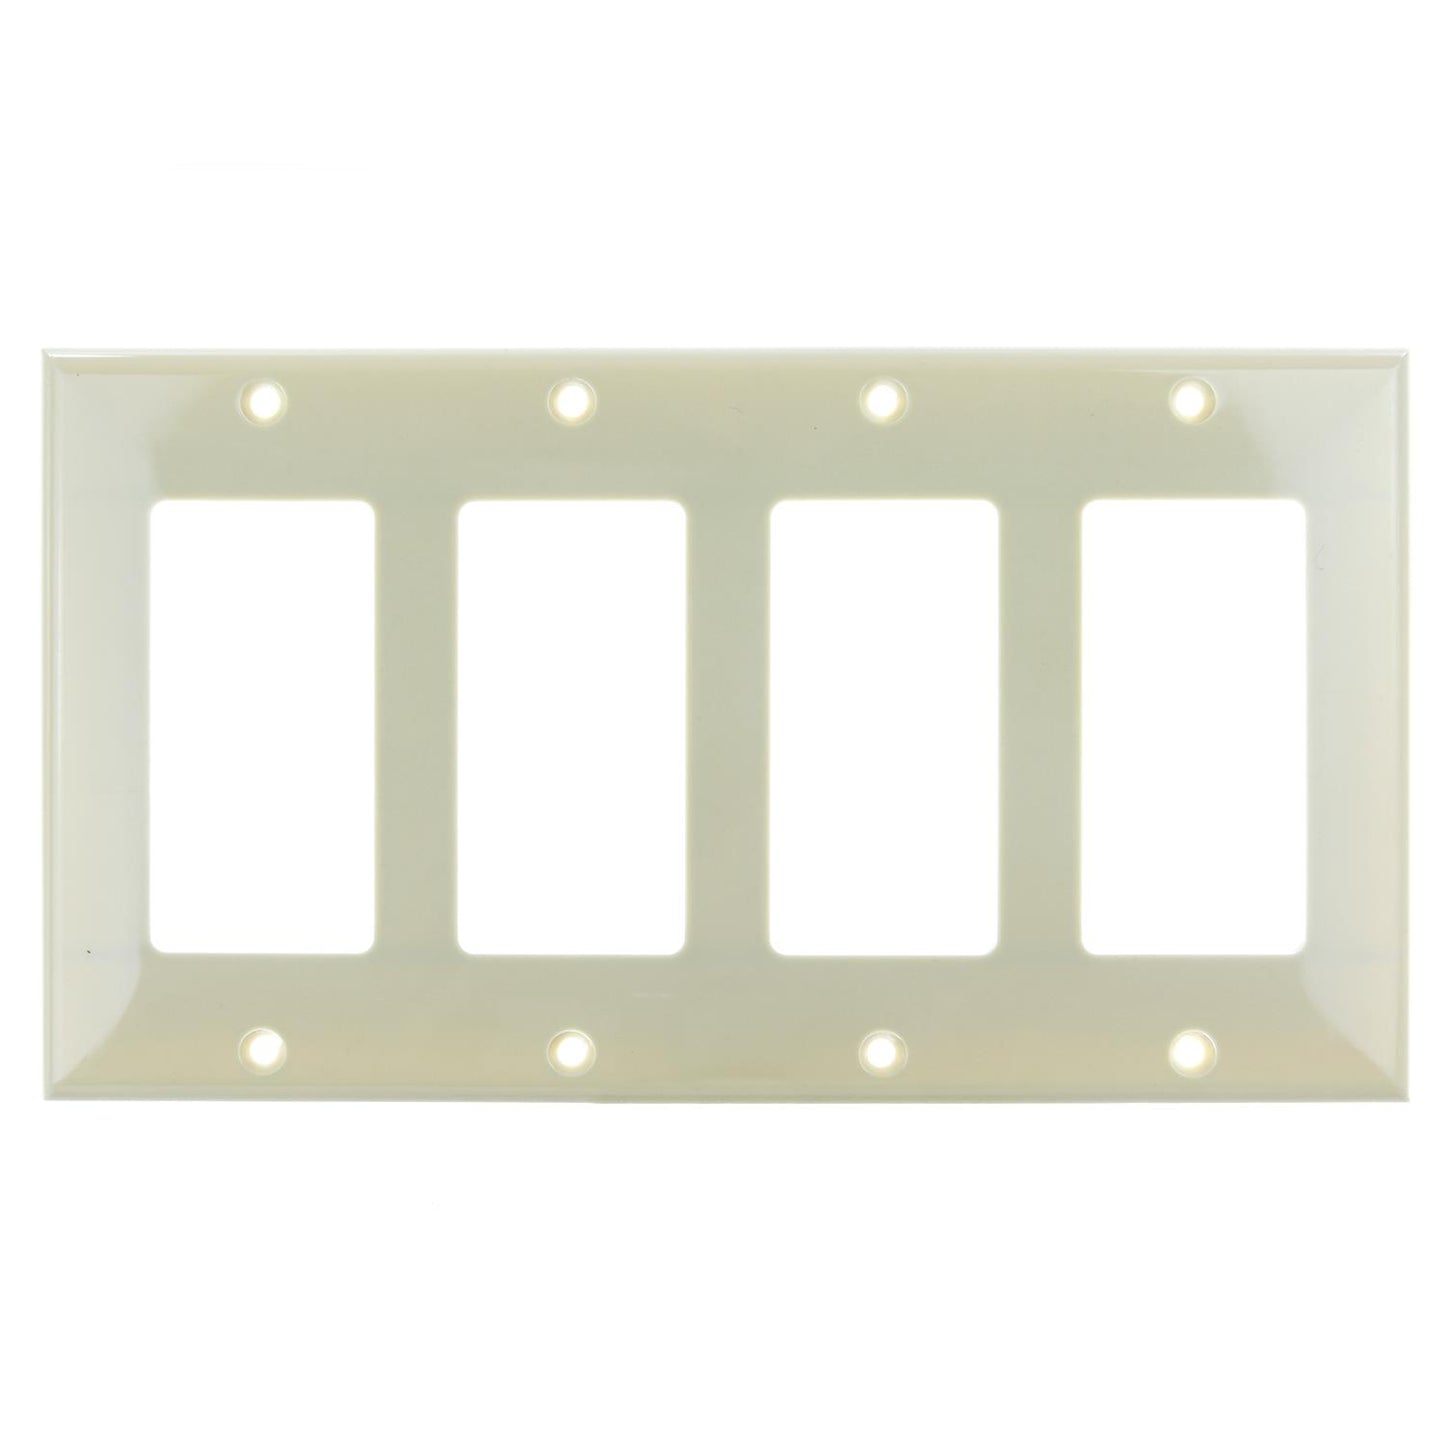 Sunlite E304/I 4 Gang Decorative Switch and Receptacle Plate, Ivory